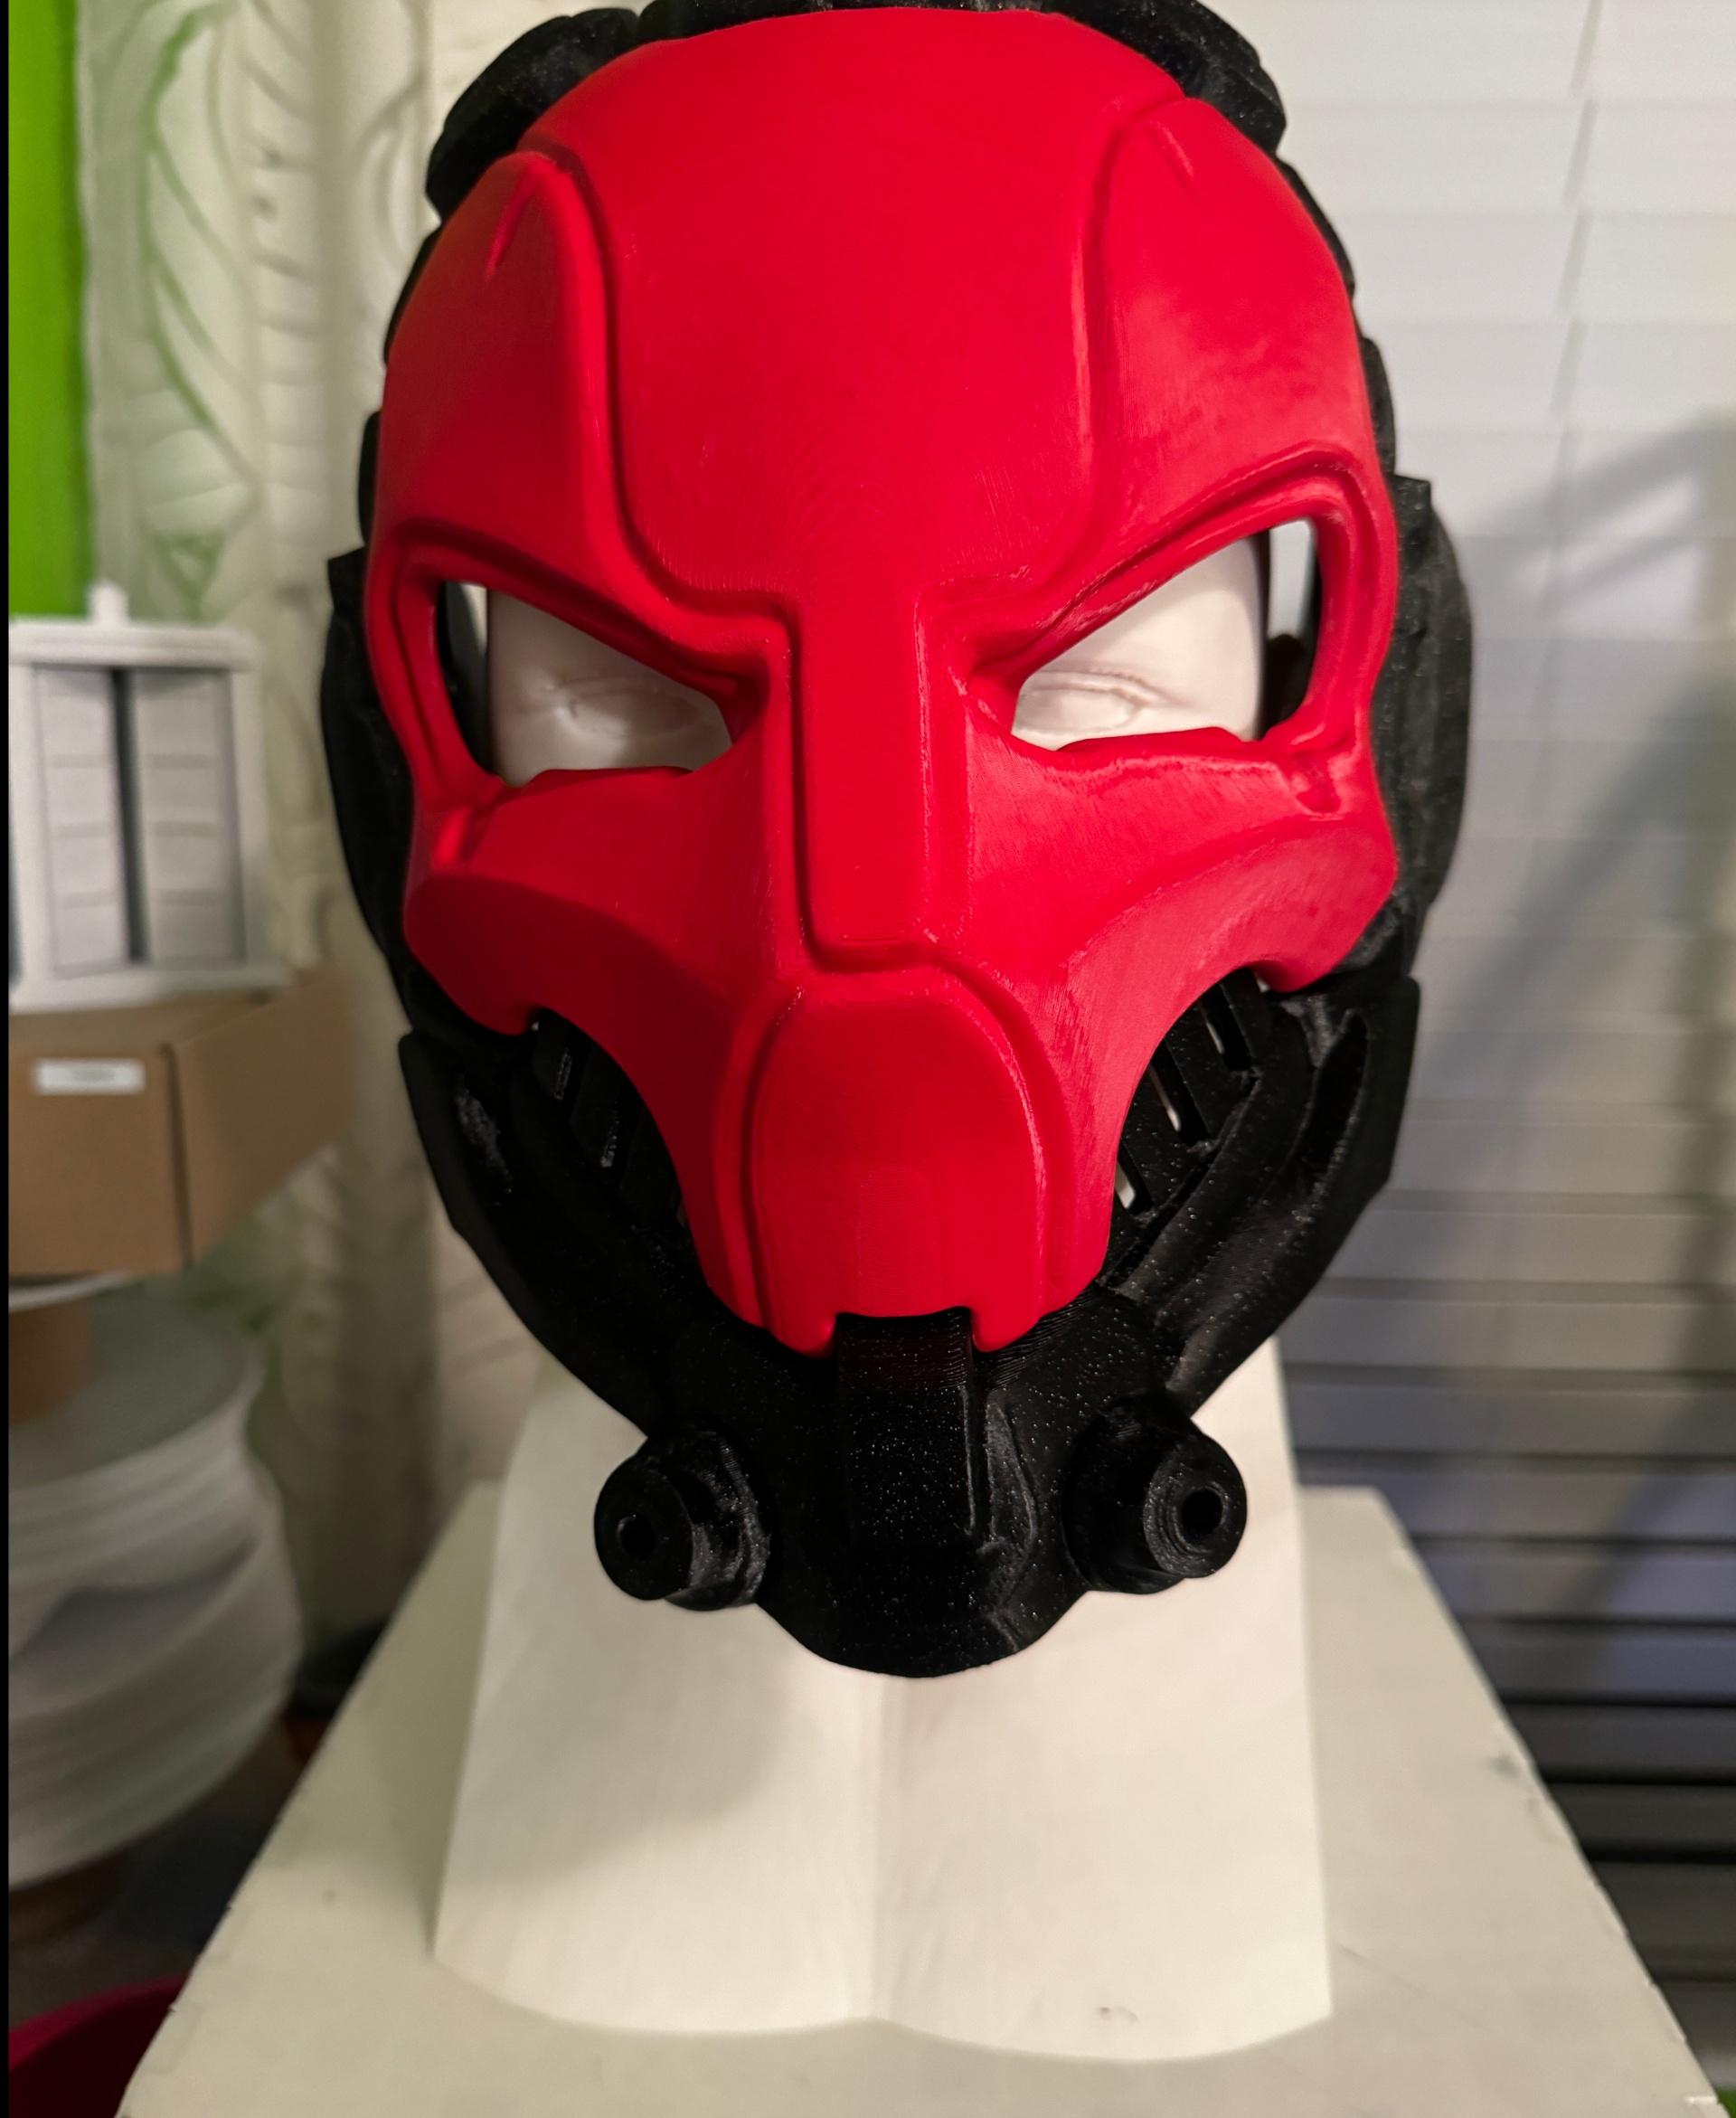 Cyber Skull Helmet  - Printed in Polymaker Polylite Galaxy Black and Wine Red PLA; displayed on a life-size mannequin head (also printed about two years ago). This one wouldn't fit in my light box, so you get it this way.

Love this mask! I want to rig it with lights. - 3d model